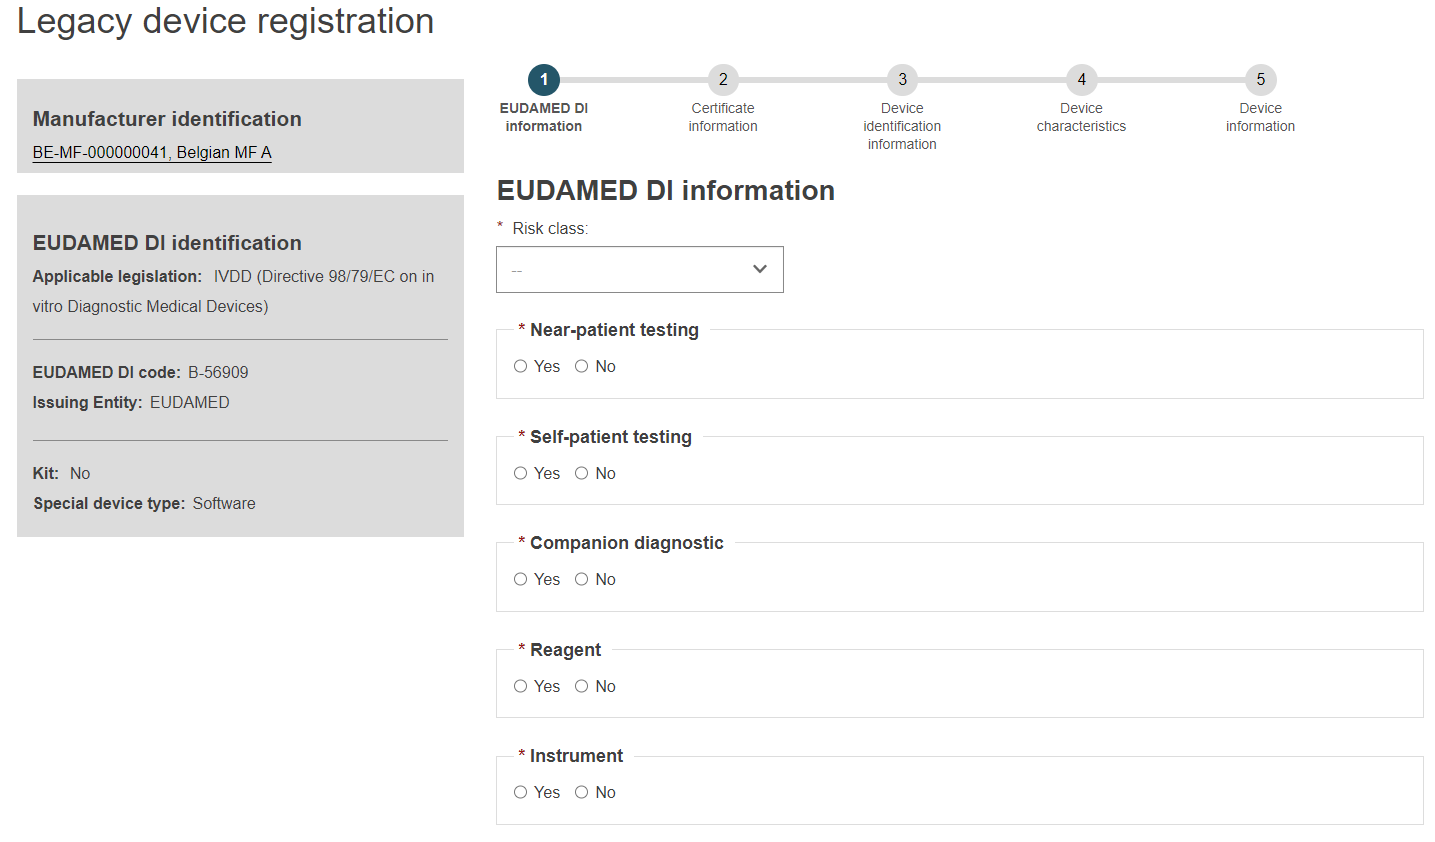 EUDAMED risk class field in the eudamed di identification step when registering legacy devices